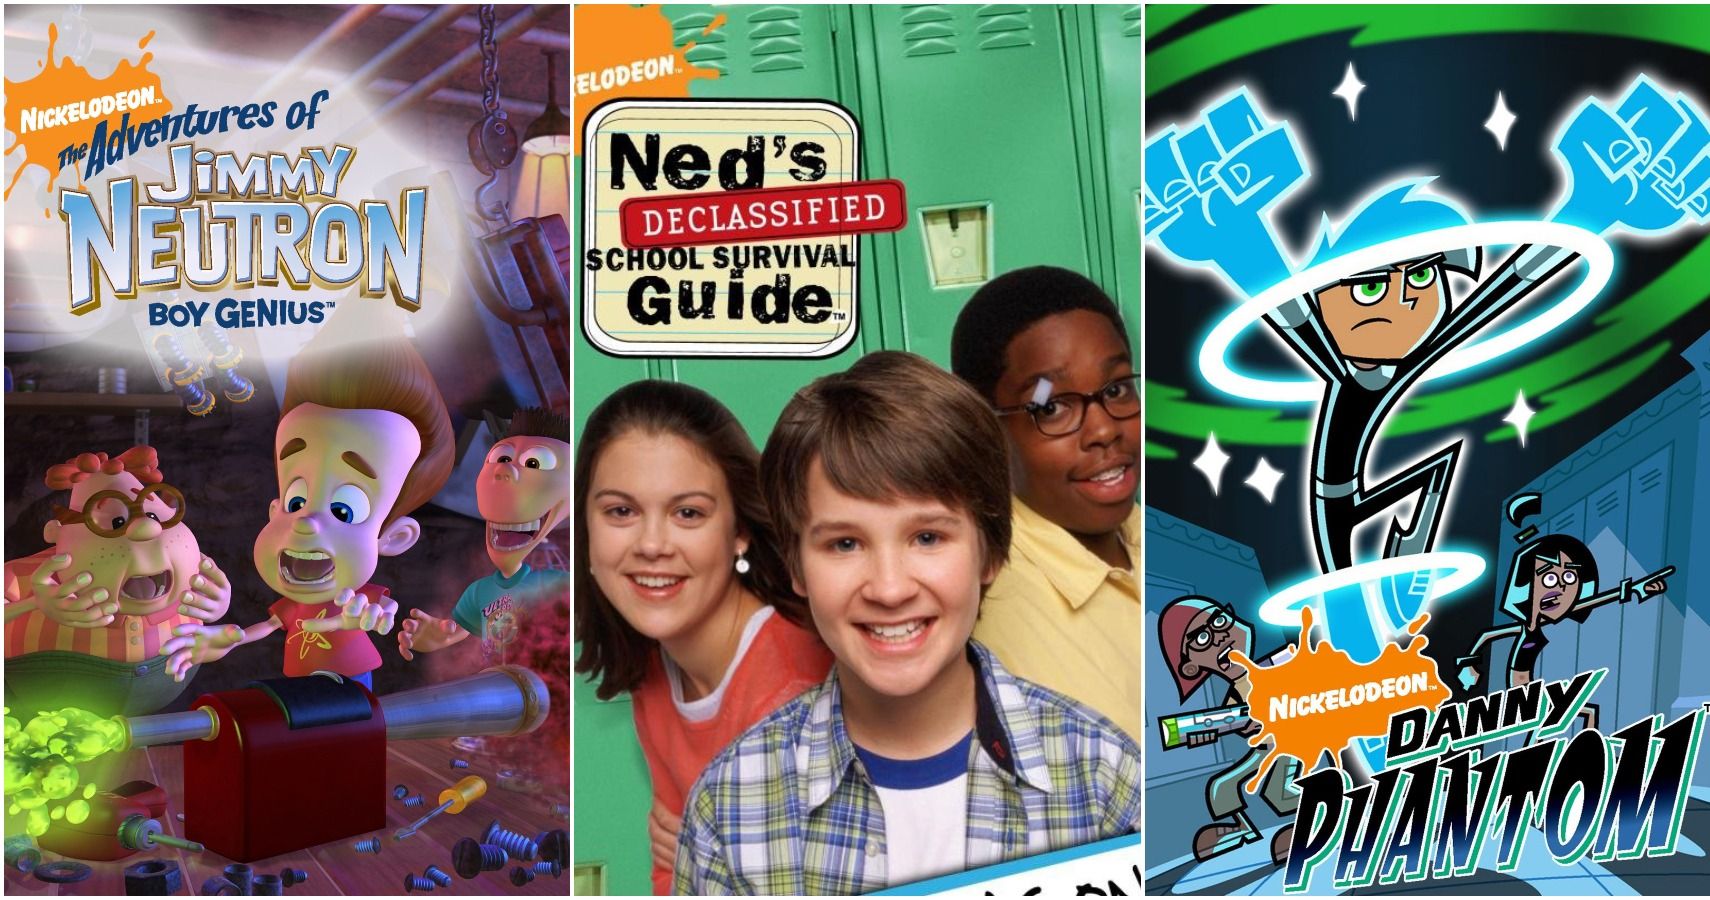 15 Best Nickelodeon Shows From The 2000s, Ranked (According To IMDb)